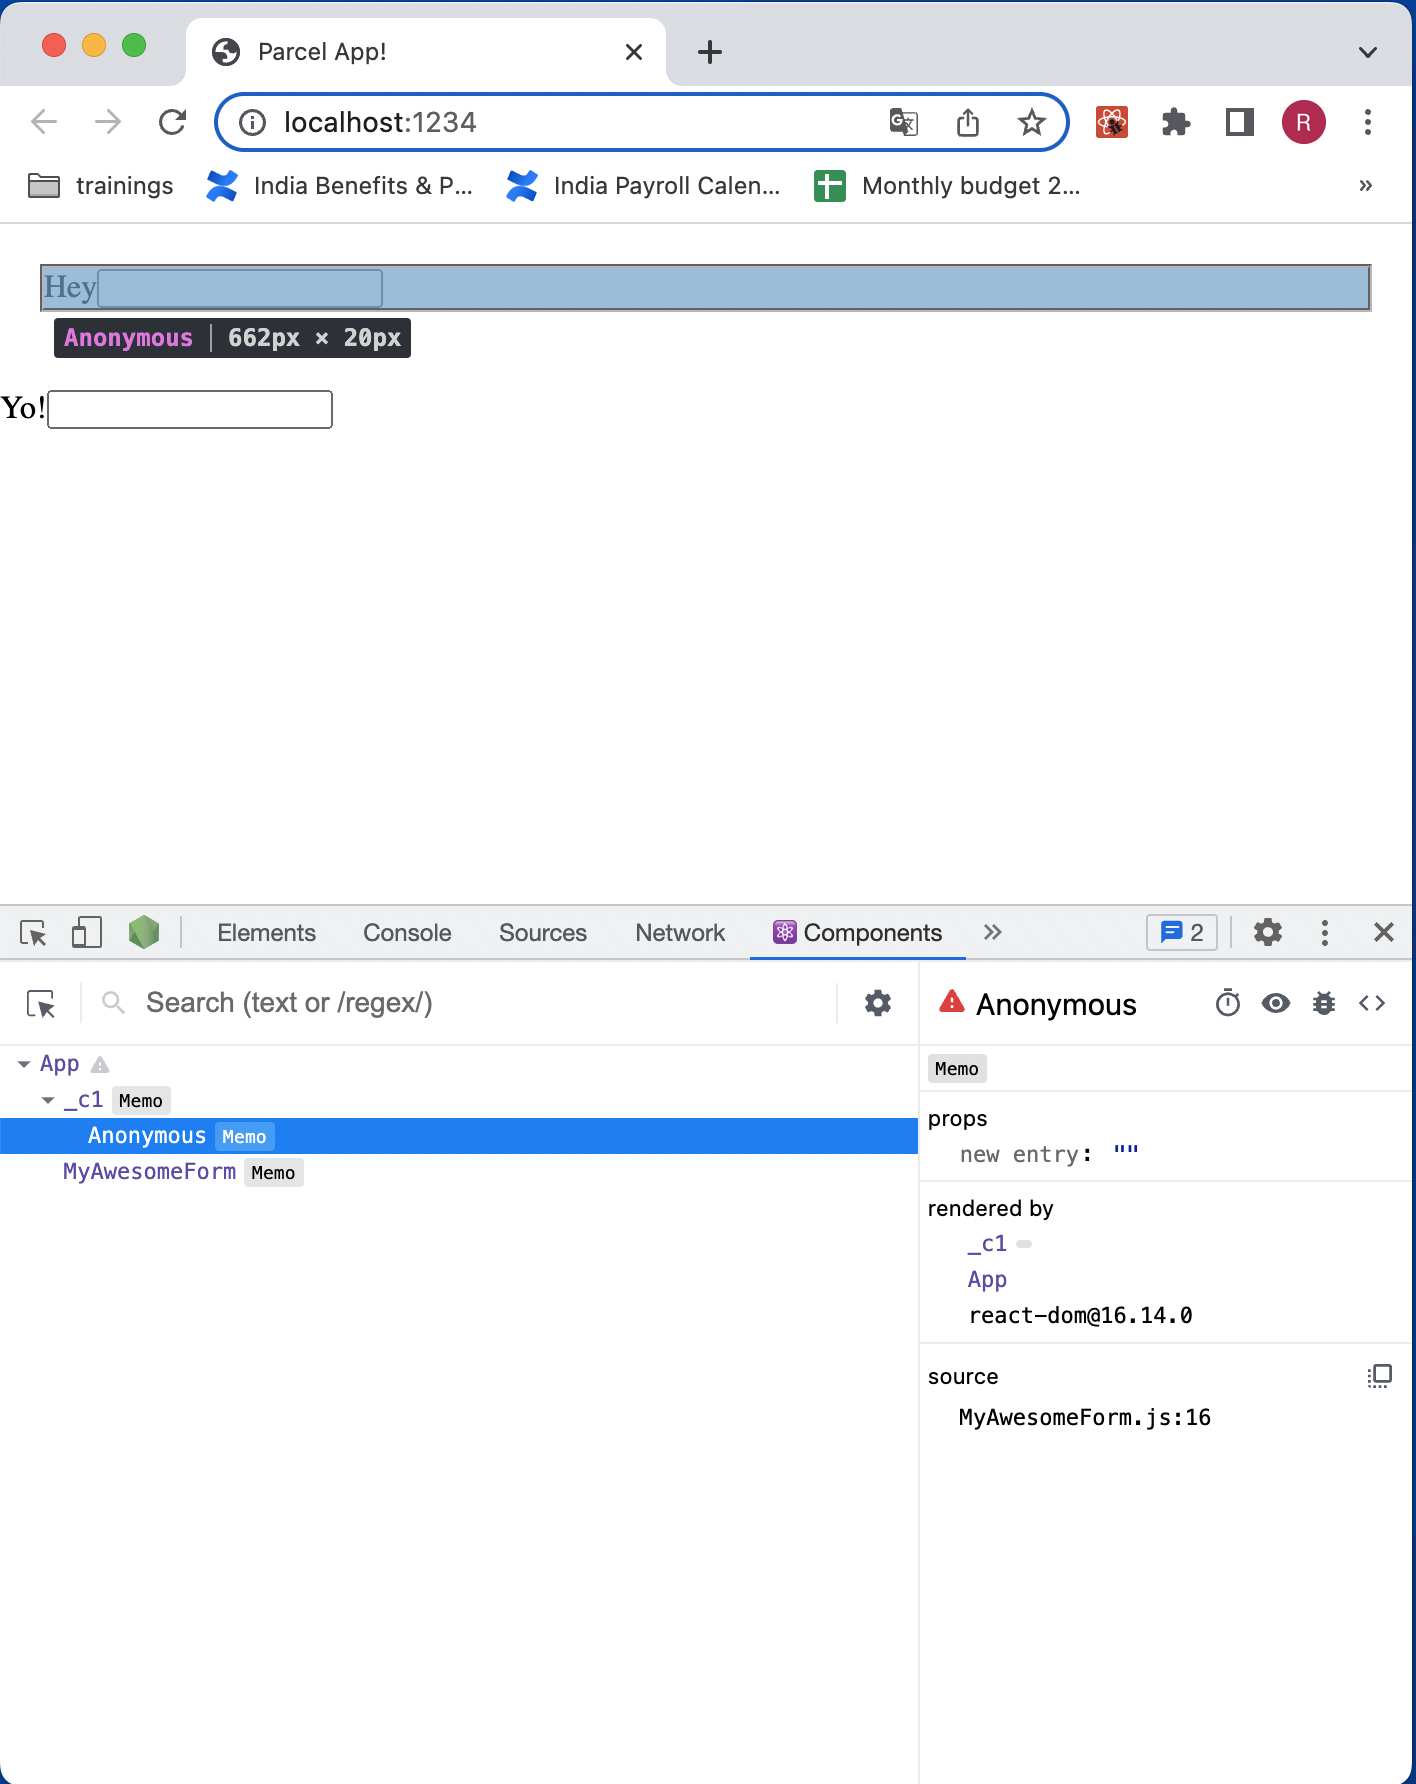 This is how the inner memoed component ends up looking in devtools